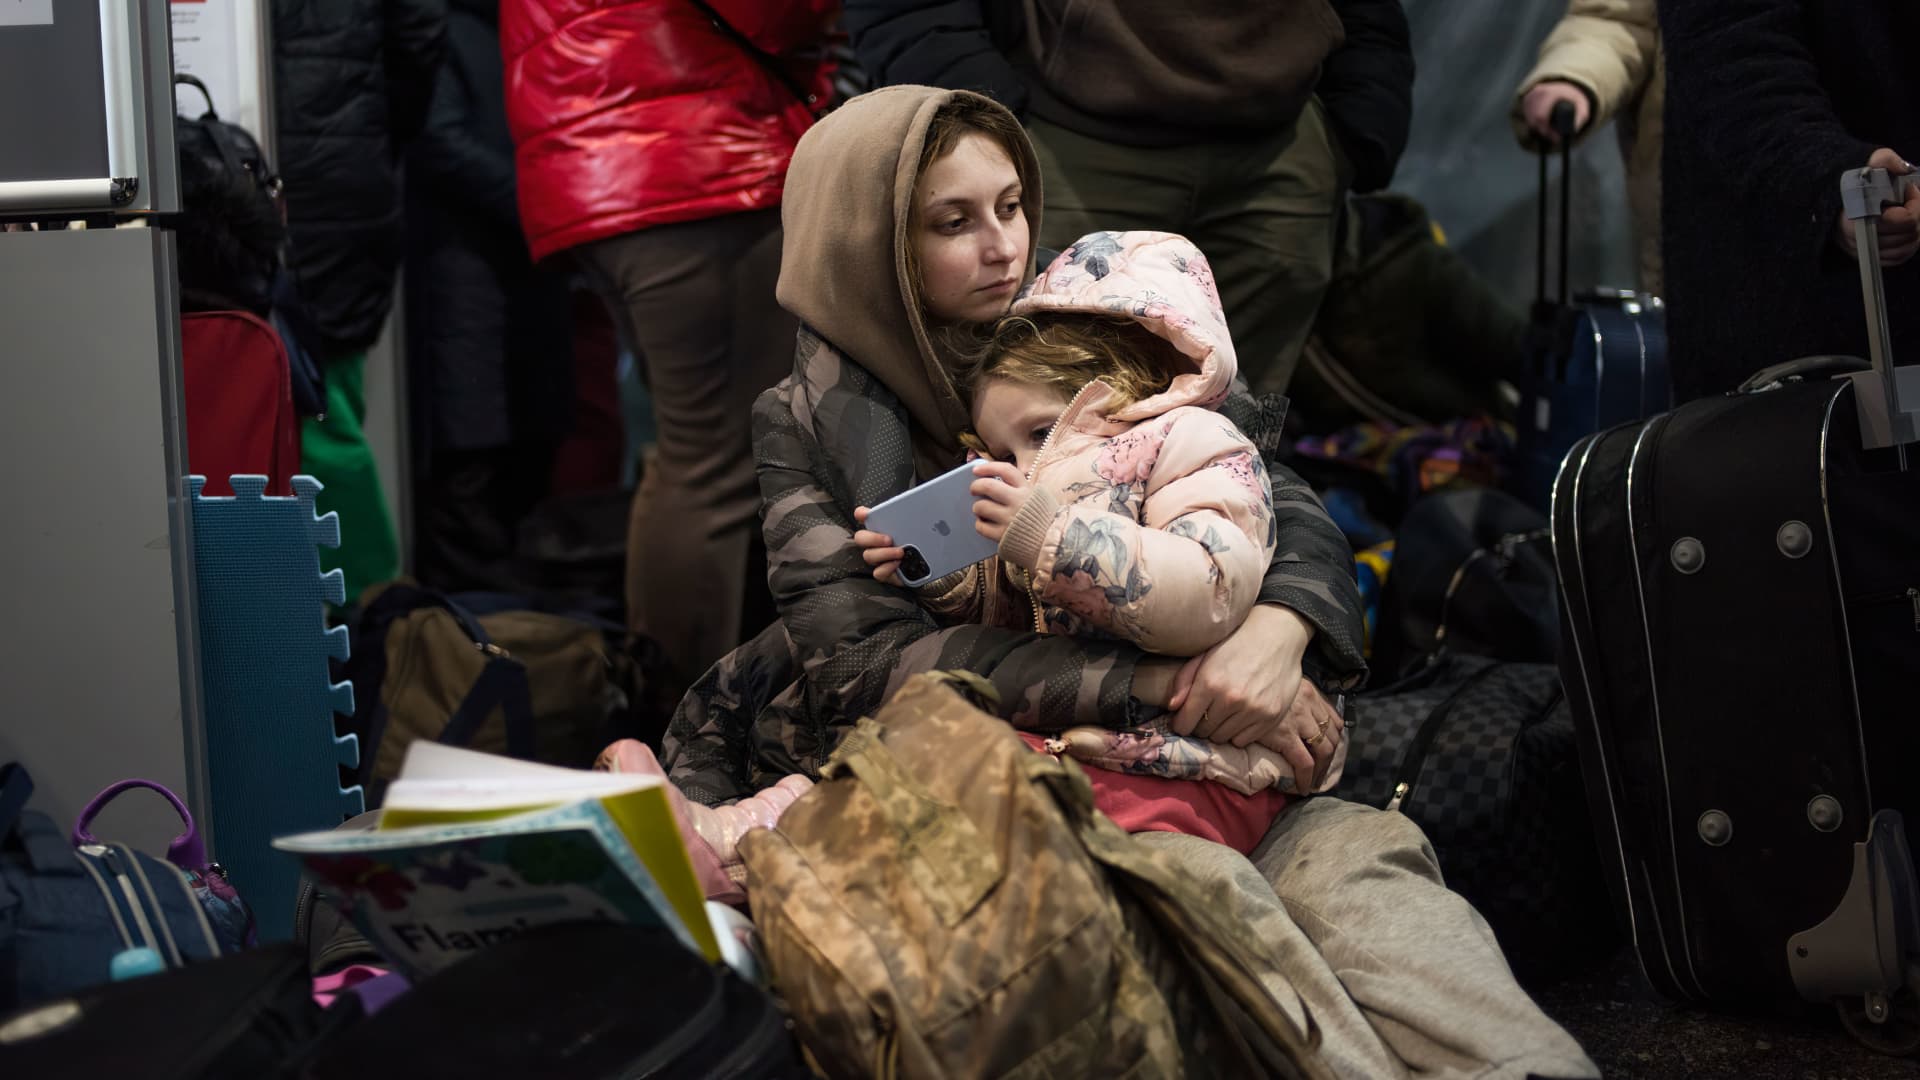 A woman seen carrying her baby at the Central Train Station in Warsaw, Poland, March 8, 2022.